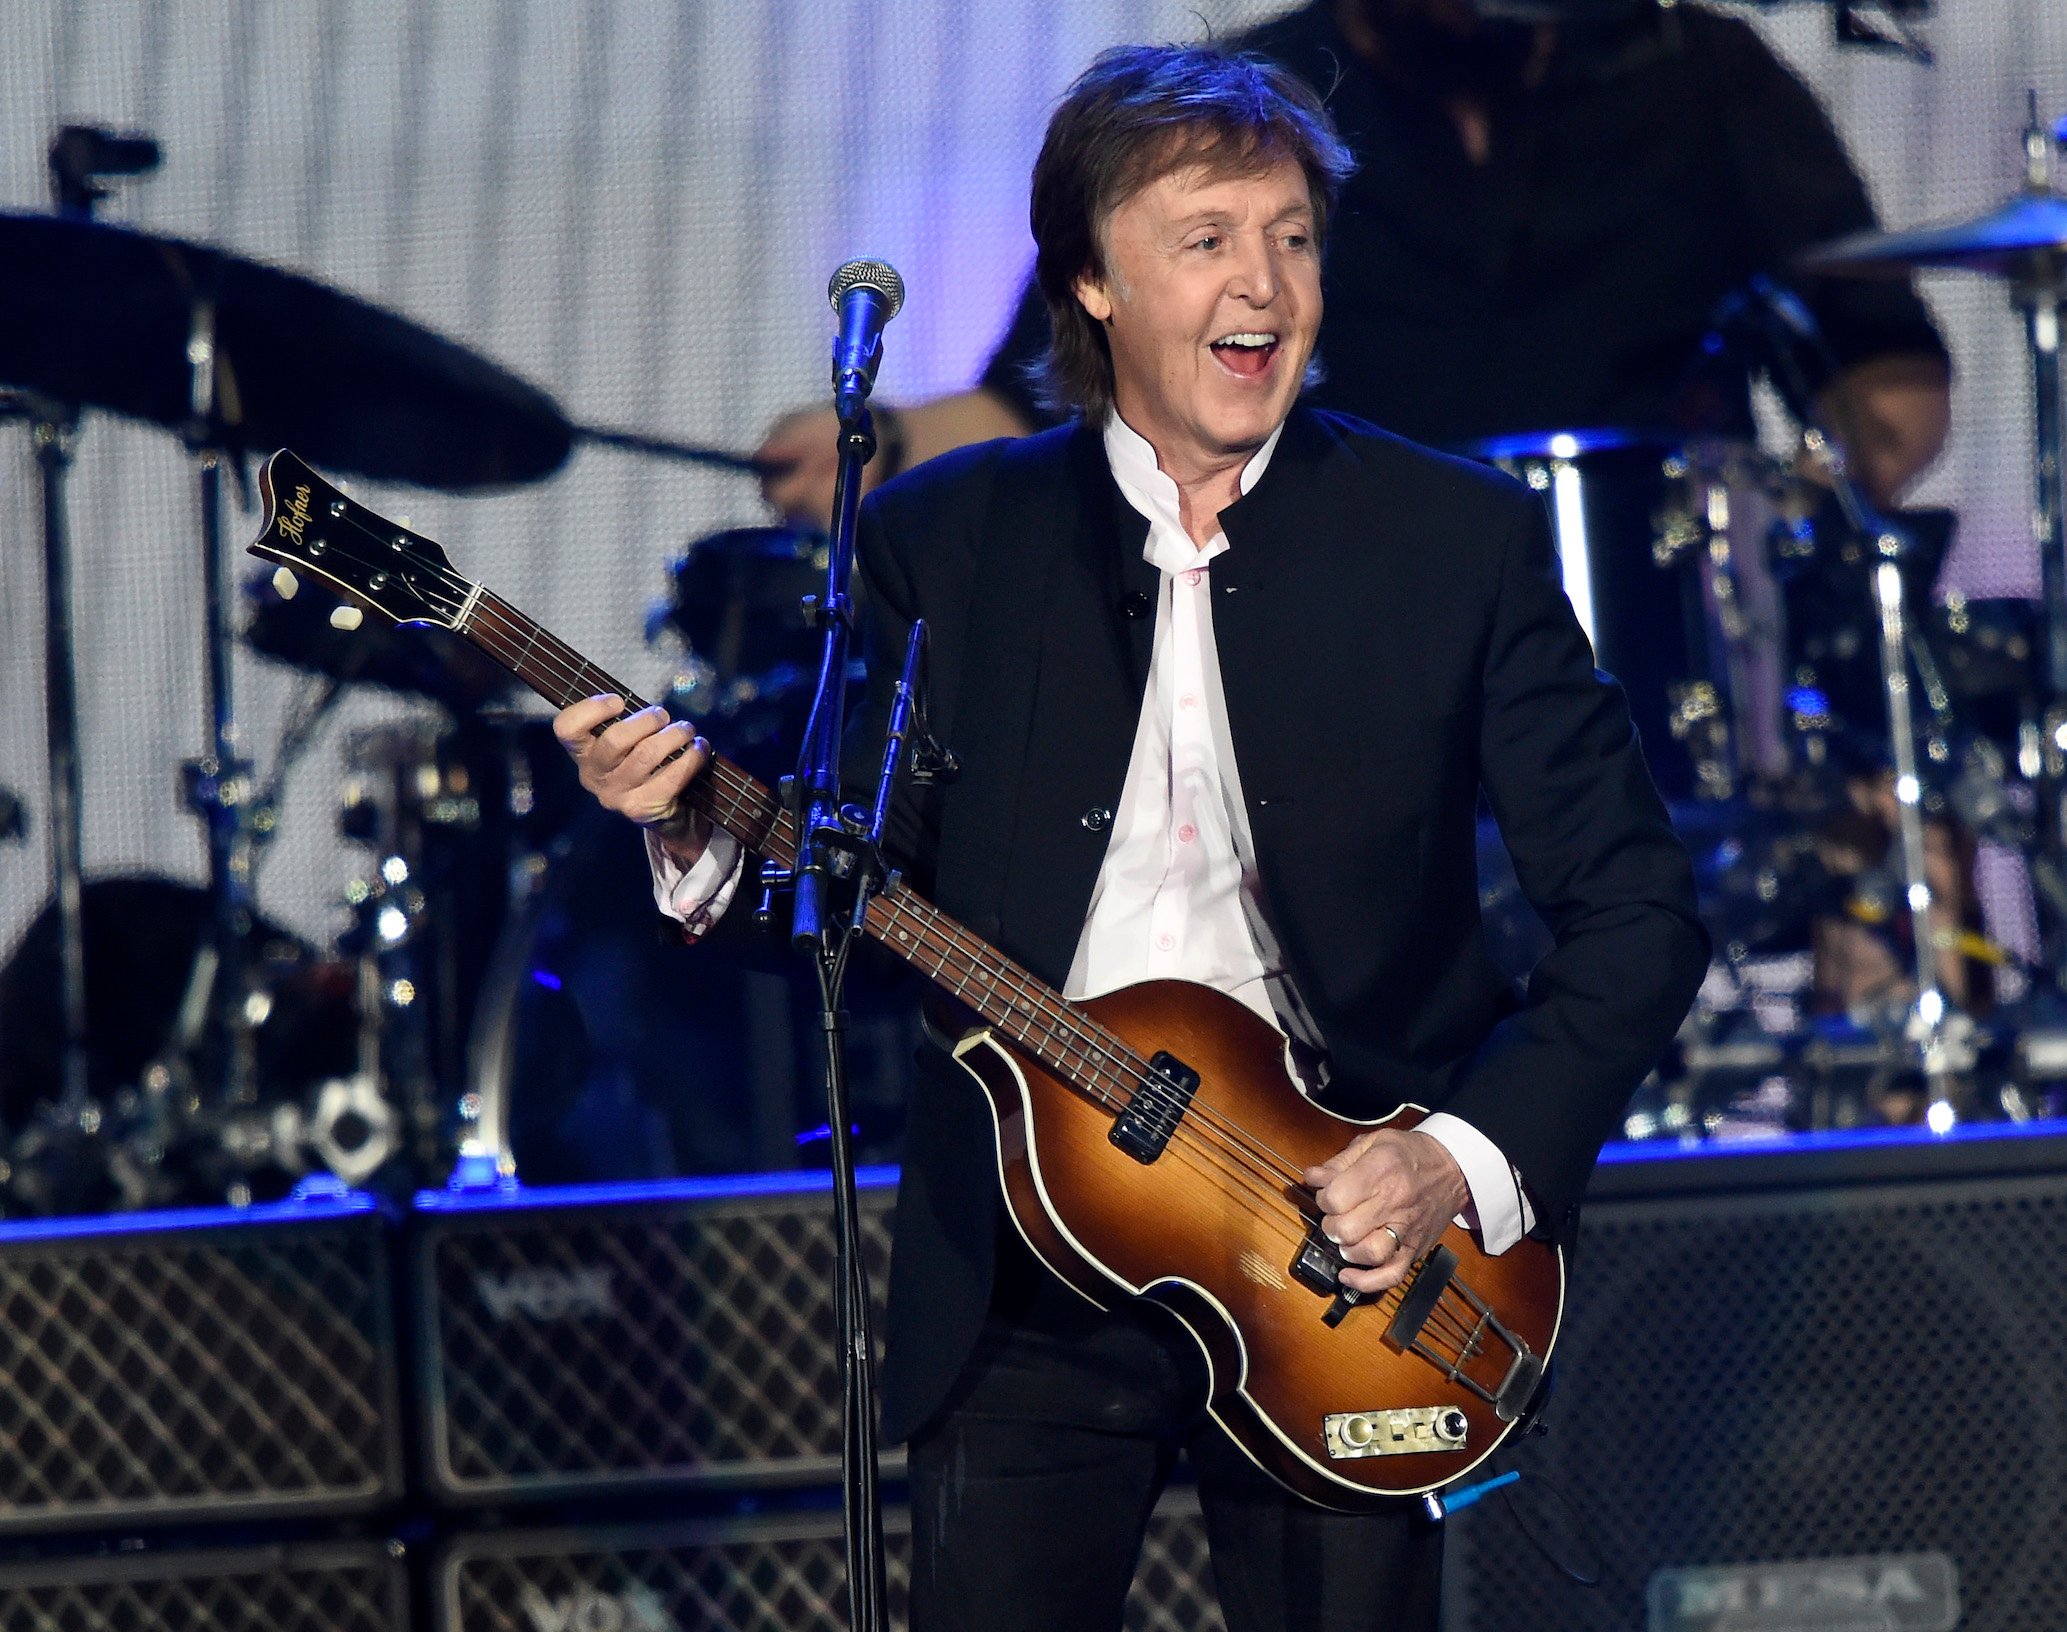 Paul McCartney formerly of The beatles performs at the Desert Trip at The Empire Polo Club in Indio, California